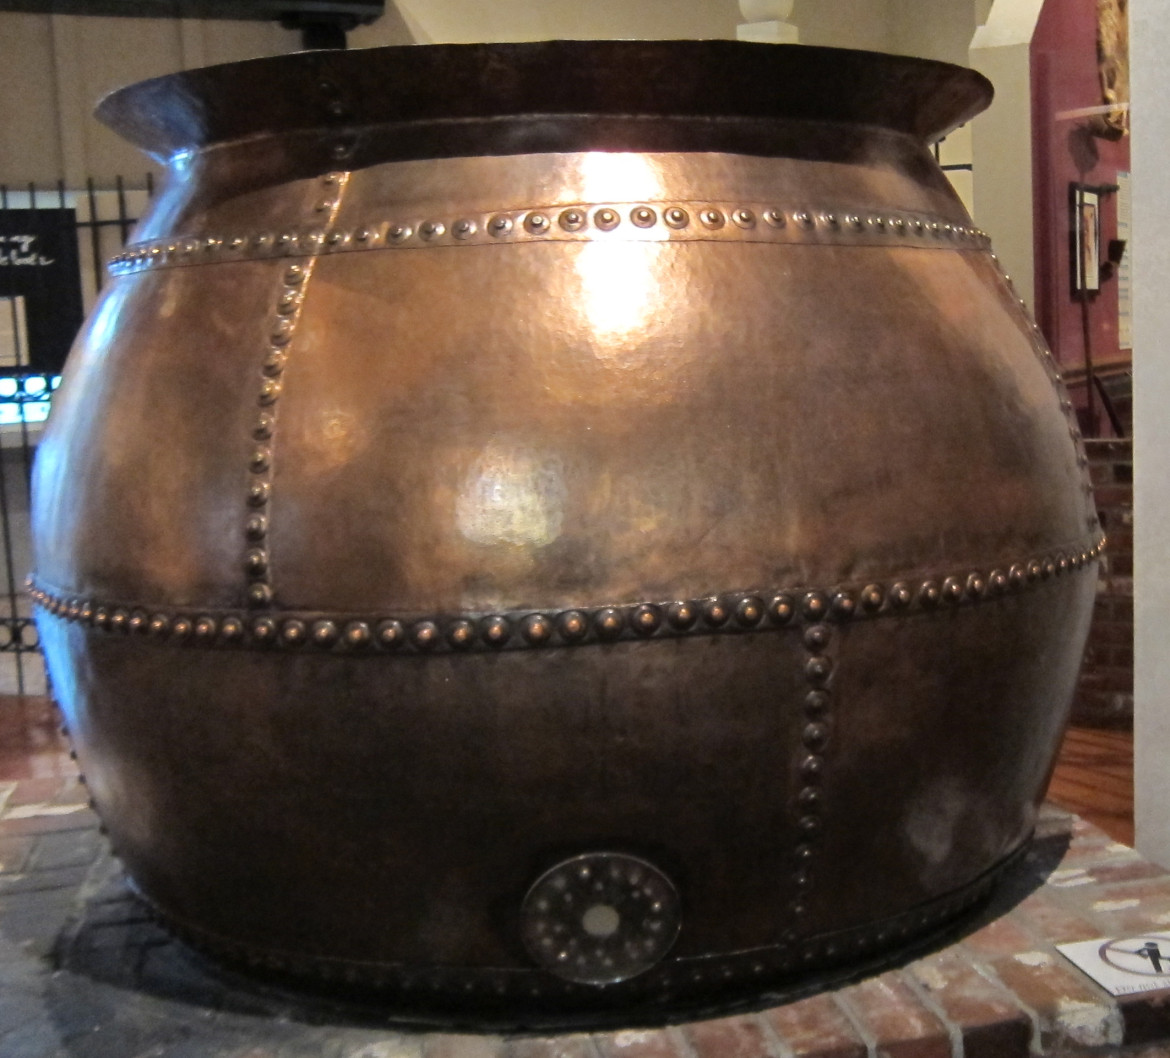 On a visit to the Missouri Historical Society I was struck by the similarity of this old brew kettle to the Maplewood Cyclone.  Both were composed of large sheets of metal joined with rivets.  If the Cyclone had been made of copper would we have saved it?  if the answer is yes, we were just one faux copper finish away from keeping it.